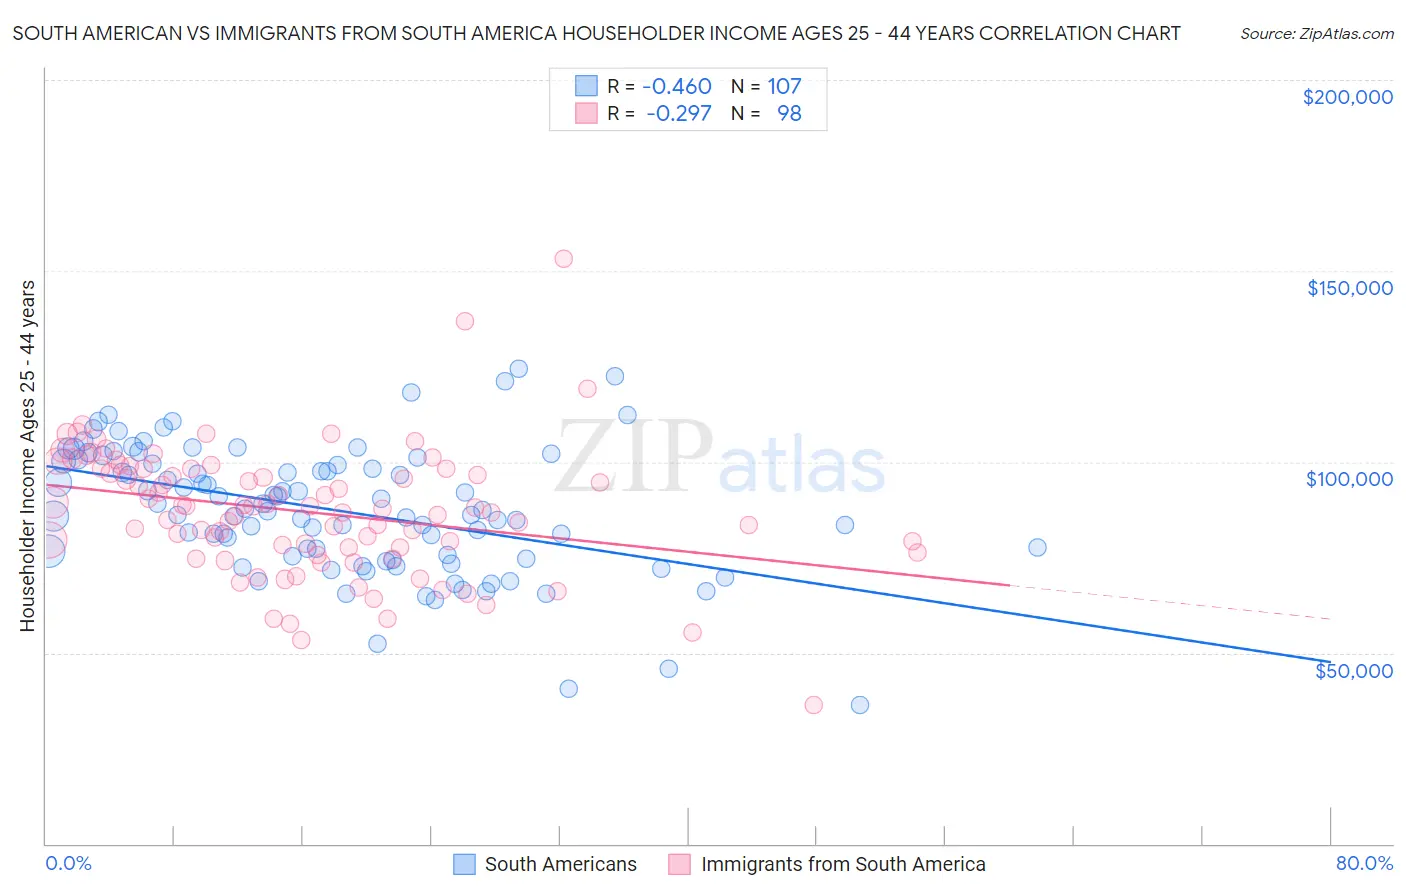 South American vs Immigrants from South America Householder Income Ages 25 - 44 years